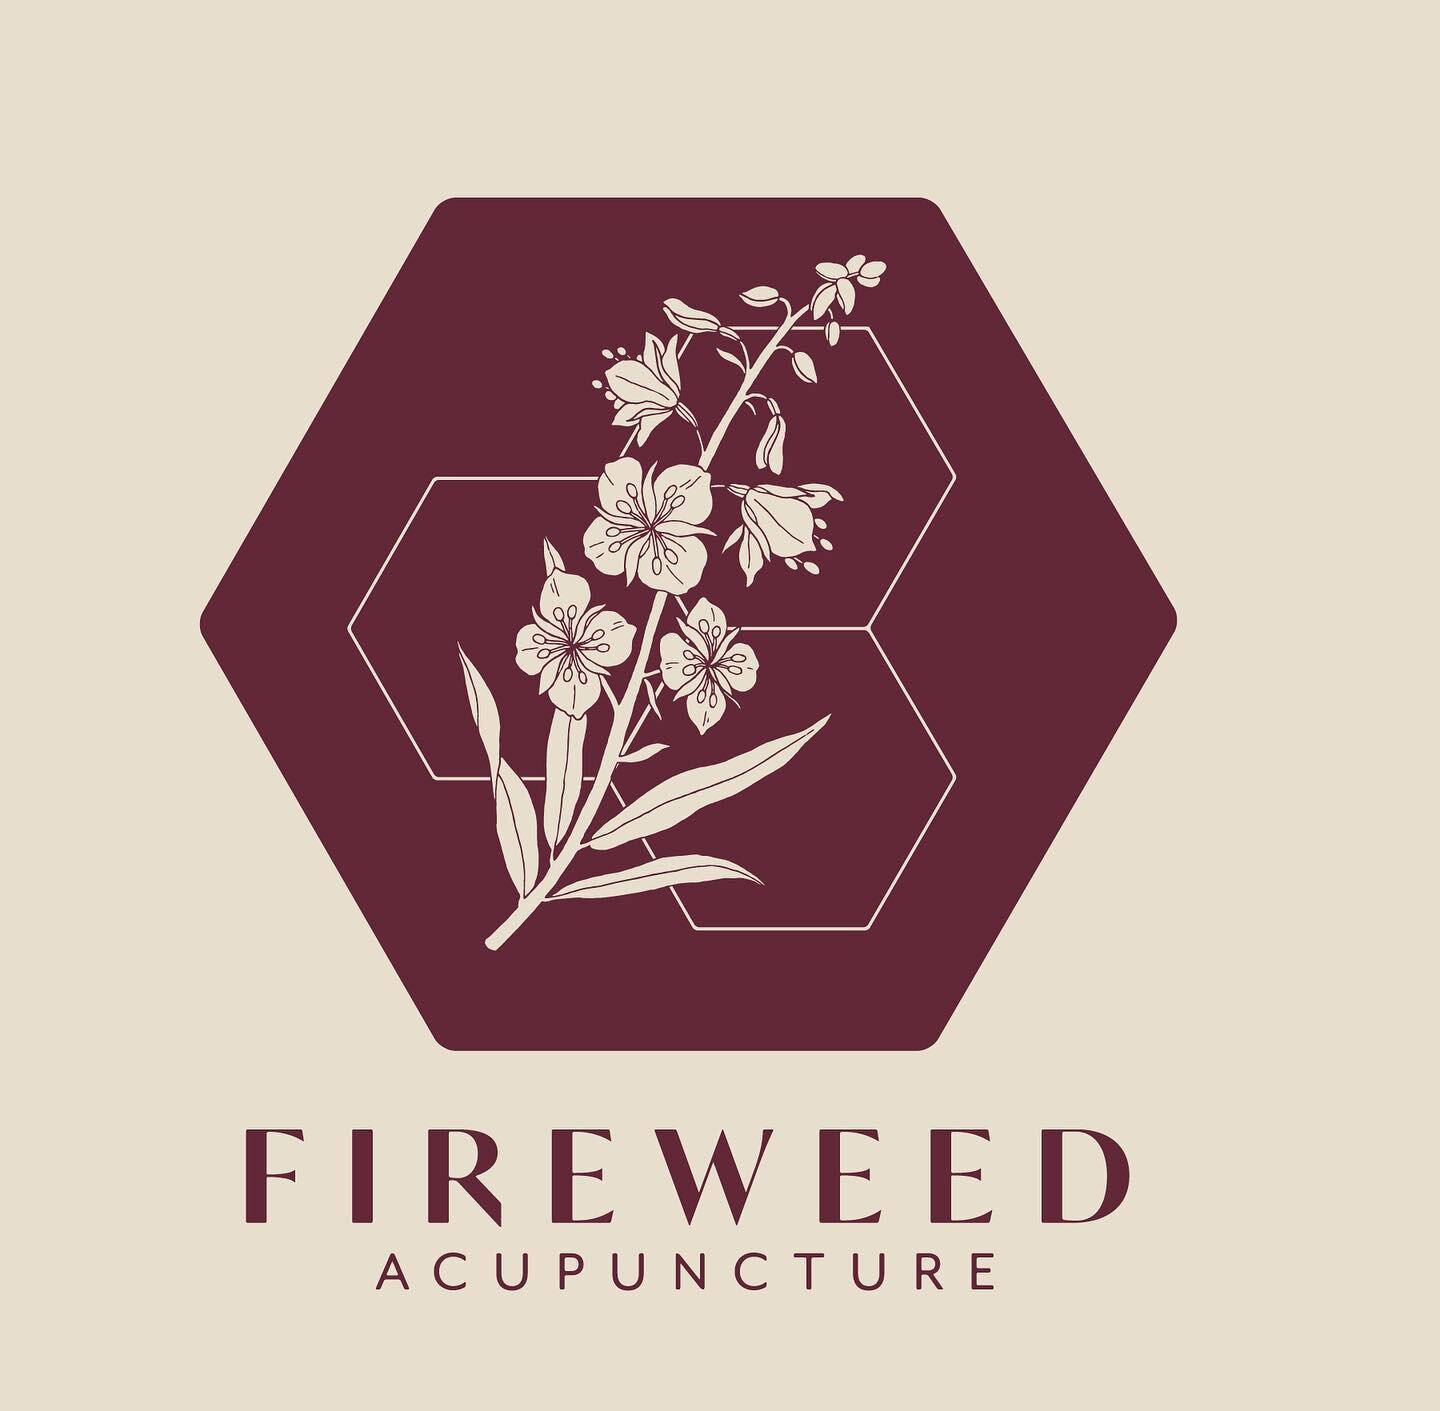 Last fall I had the opportunity to work on this logo for @fireweedacupuncture based out of Iowa! Kate needed something that spoke to a sense of community while also being approachable for her client base. The result was this fireweed illustration set